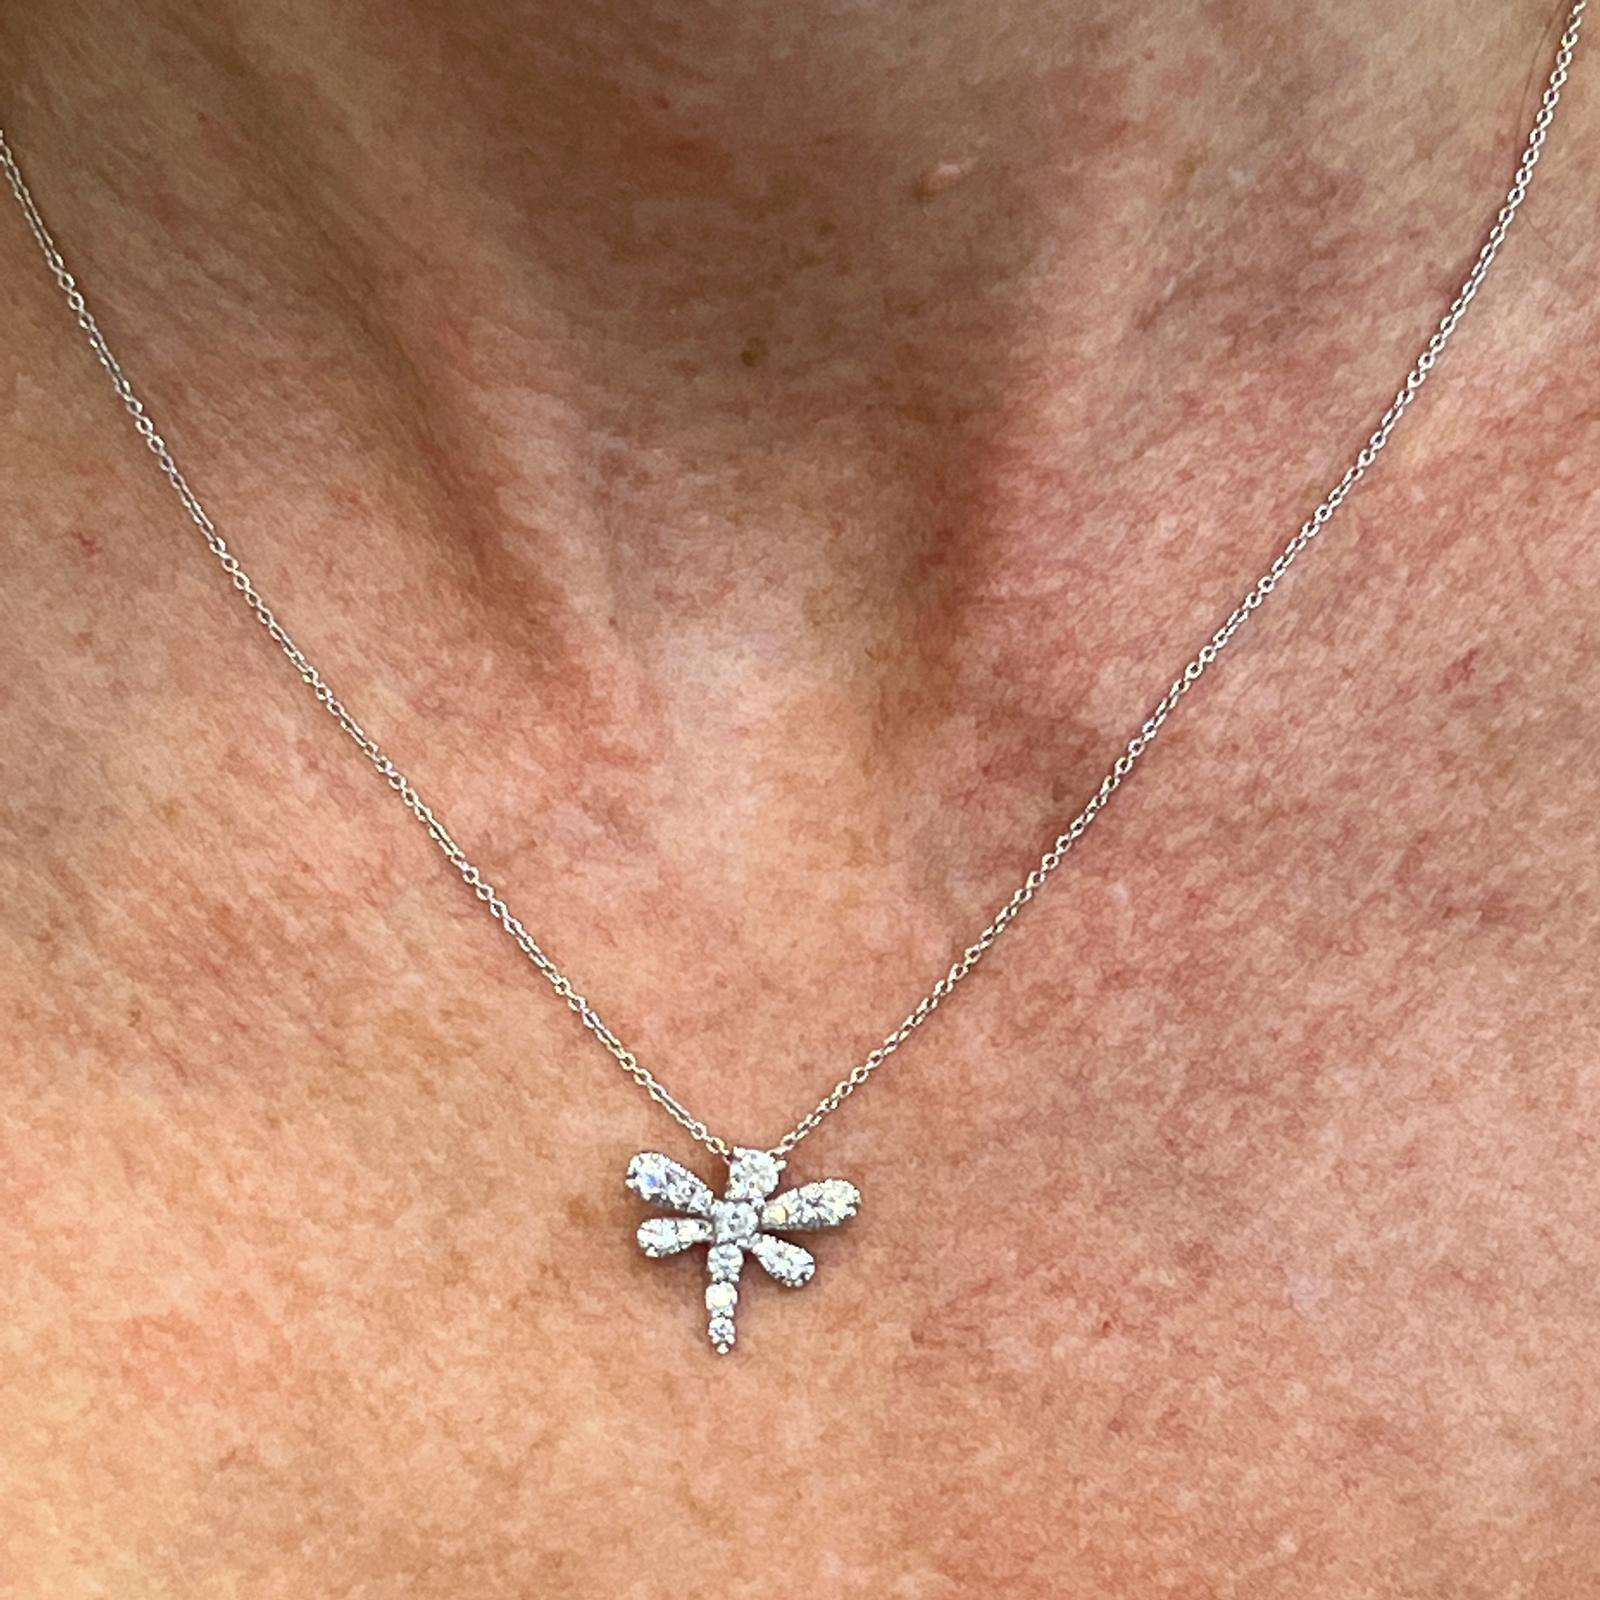 Diamond dragonfly pendant, by Roberto Coin's Tiny Treasure collection, is fashioned in 18 karat white gold. The pendant features 15 round brilliant cut diamonds weighing .44 carat total weight. The pendant measures 15 x 15mm and the chain can be